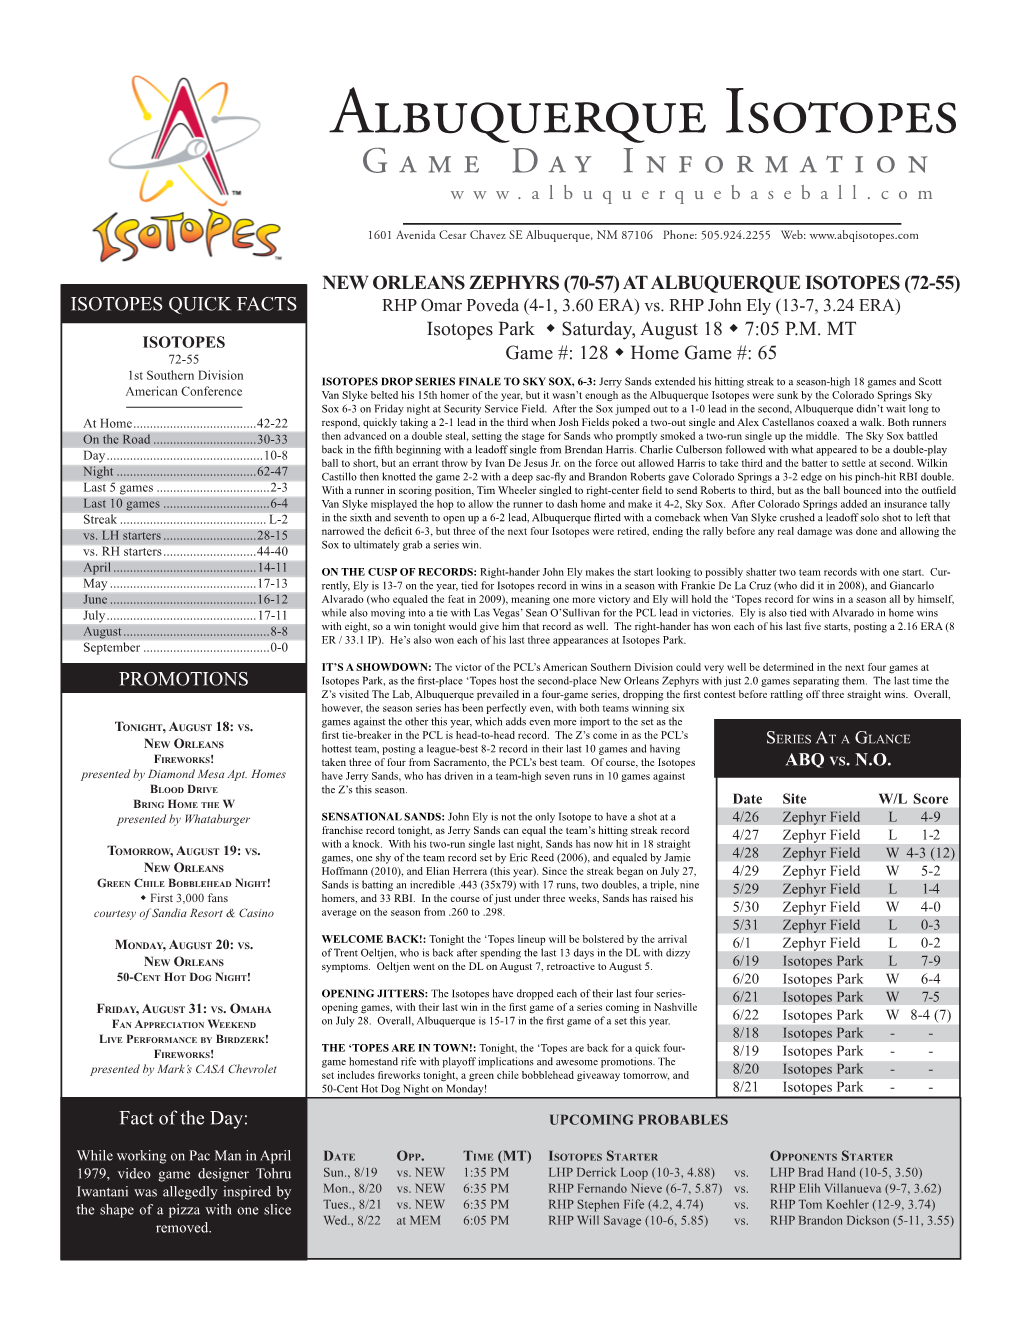 Albuquerque Isotopes Game Day Information